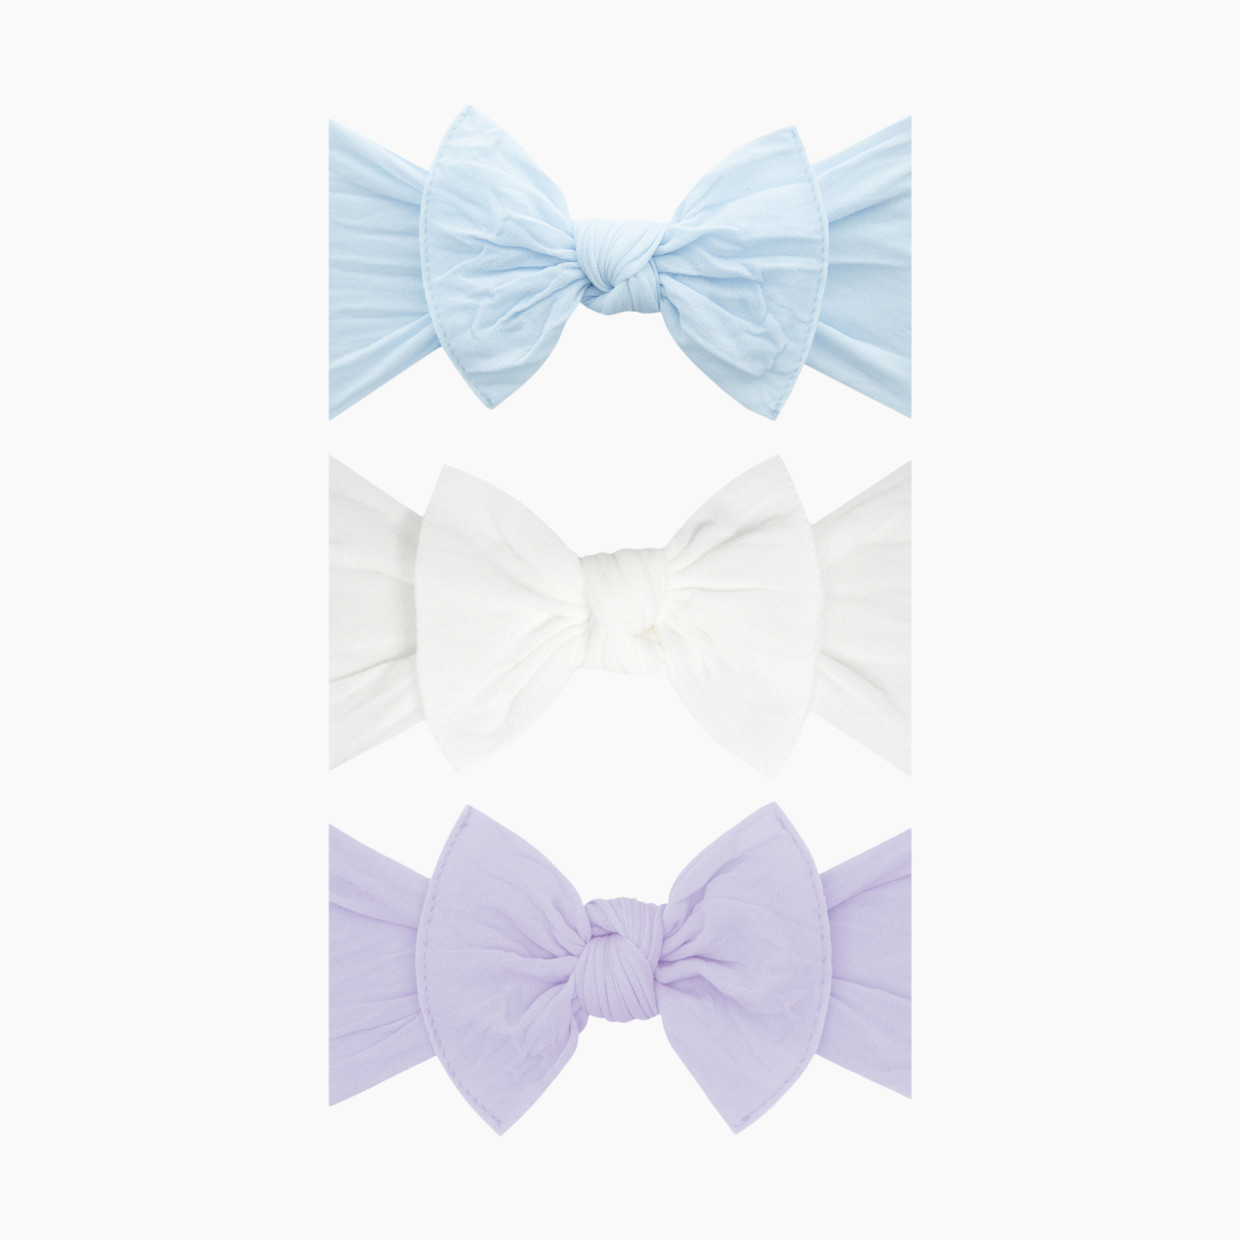 Baby Bling Classic Knot Headband Set (3 pack) - Sky/White/Light Orchid.